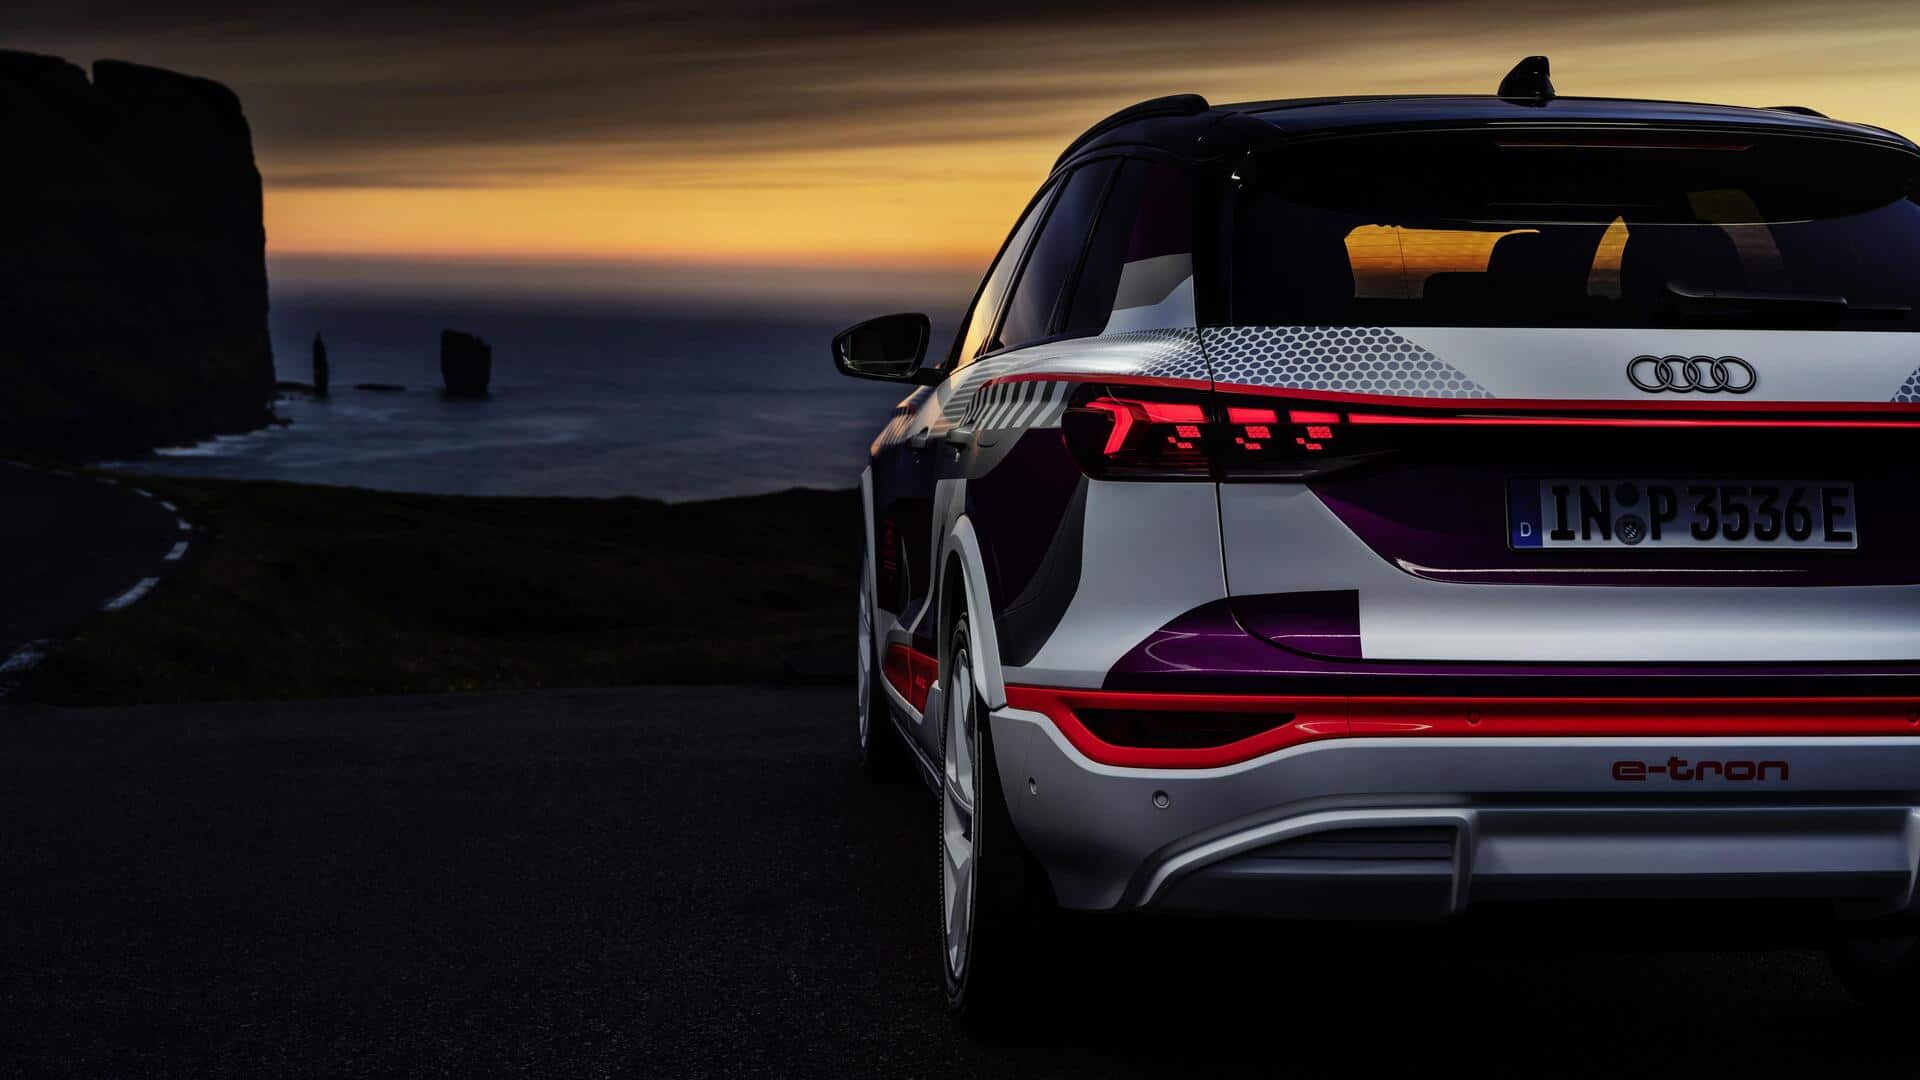 Audi's new OLED taillights will warn other drivers of obstructions